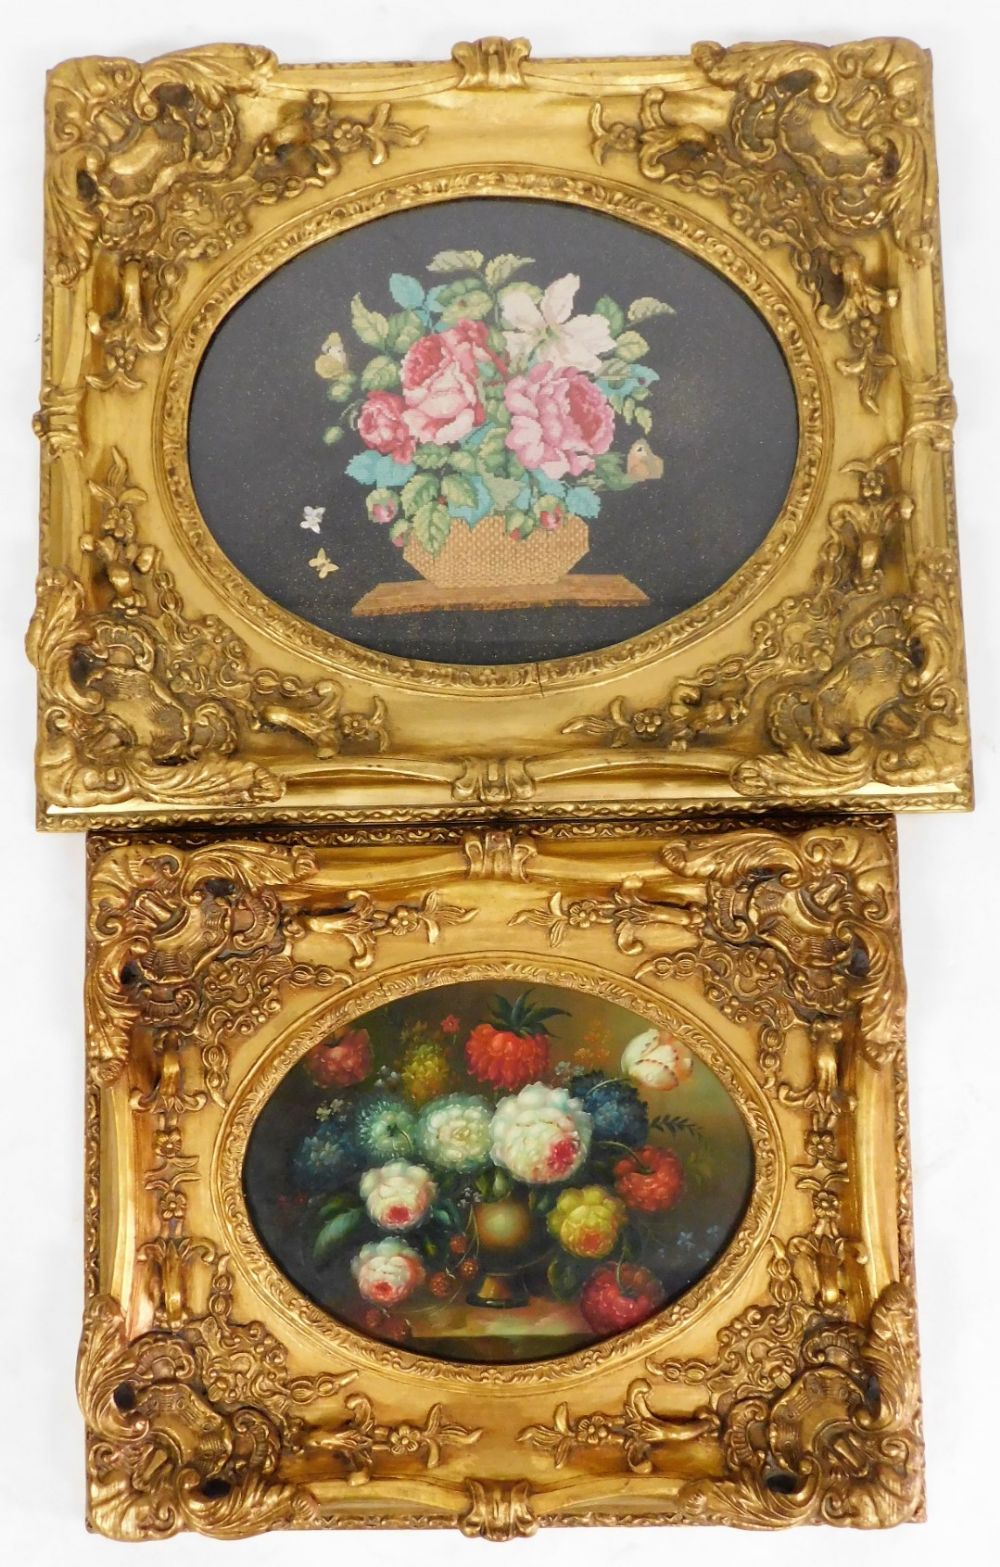 Two floral still lifes, each in elaborate gilt painted framing, in modern finish, one oil on board,